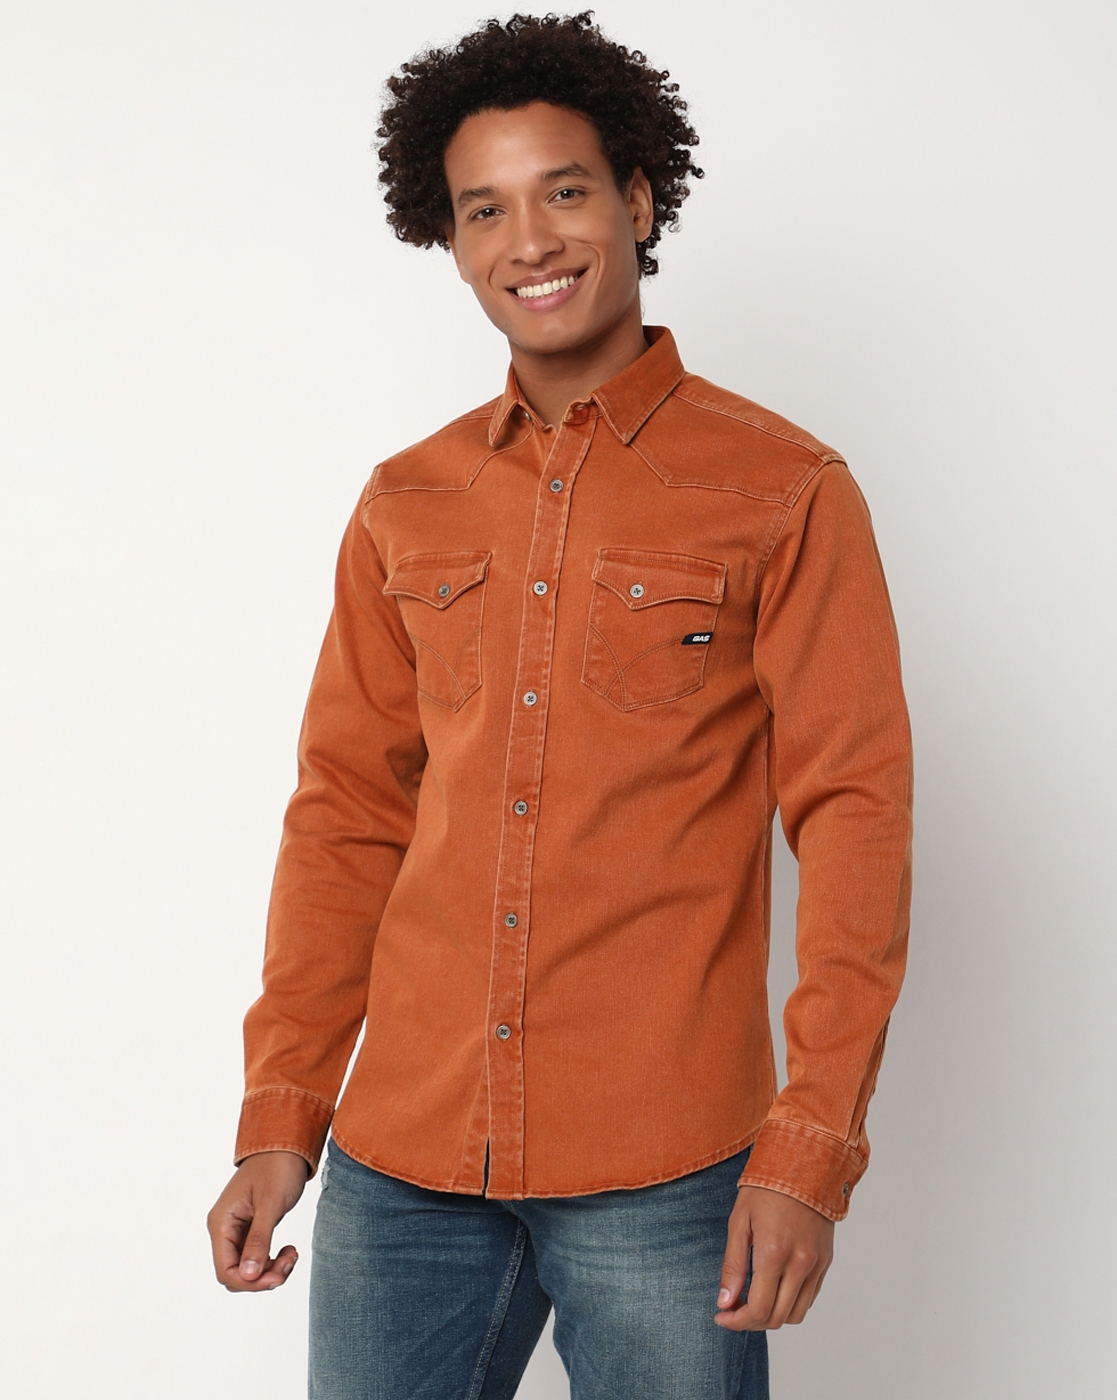 GAS | Regular Fit Full Sleeve Solid Polycotton Shirts